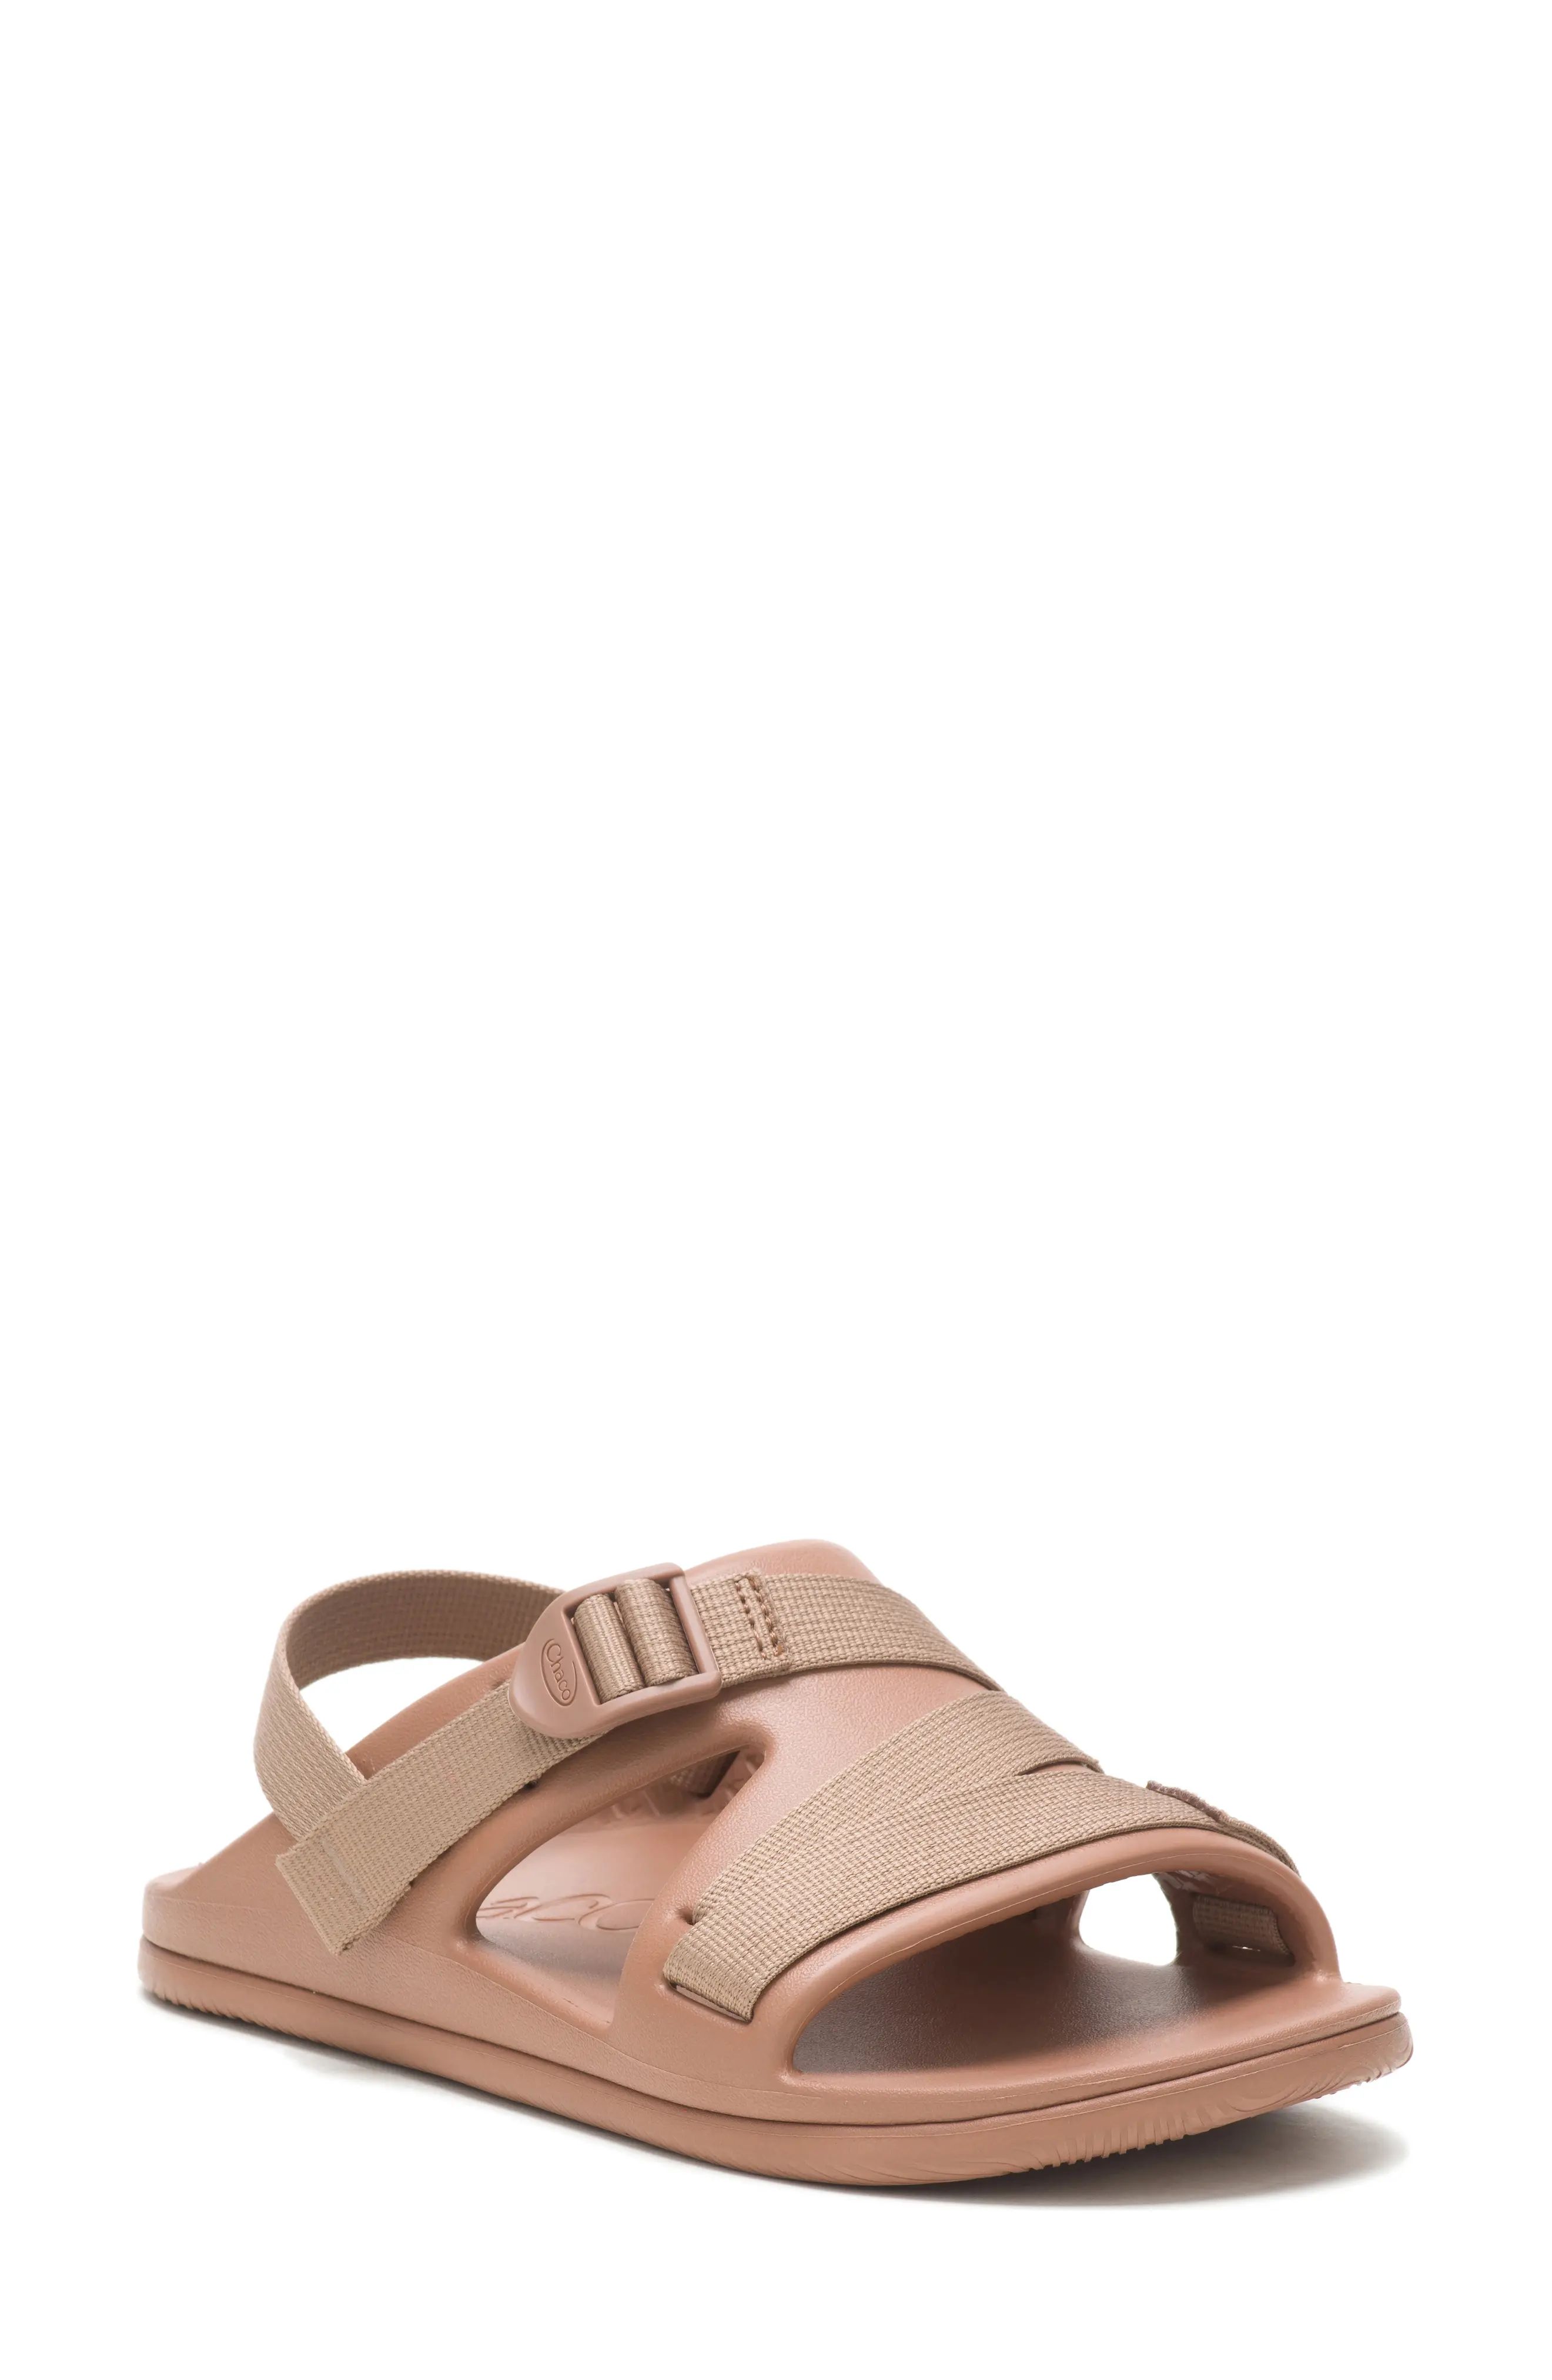 Chaco Chillos Sport Sandal in Clay at Nordstrom, Size 7 | Nordstrom